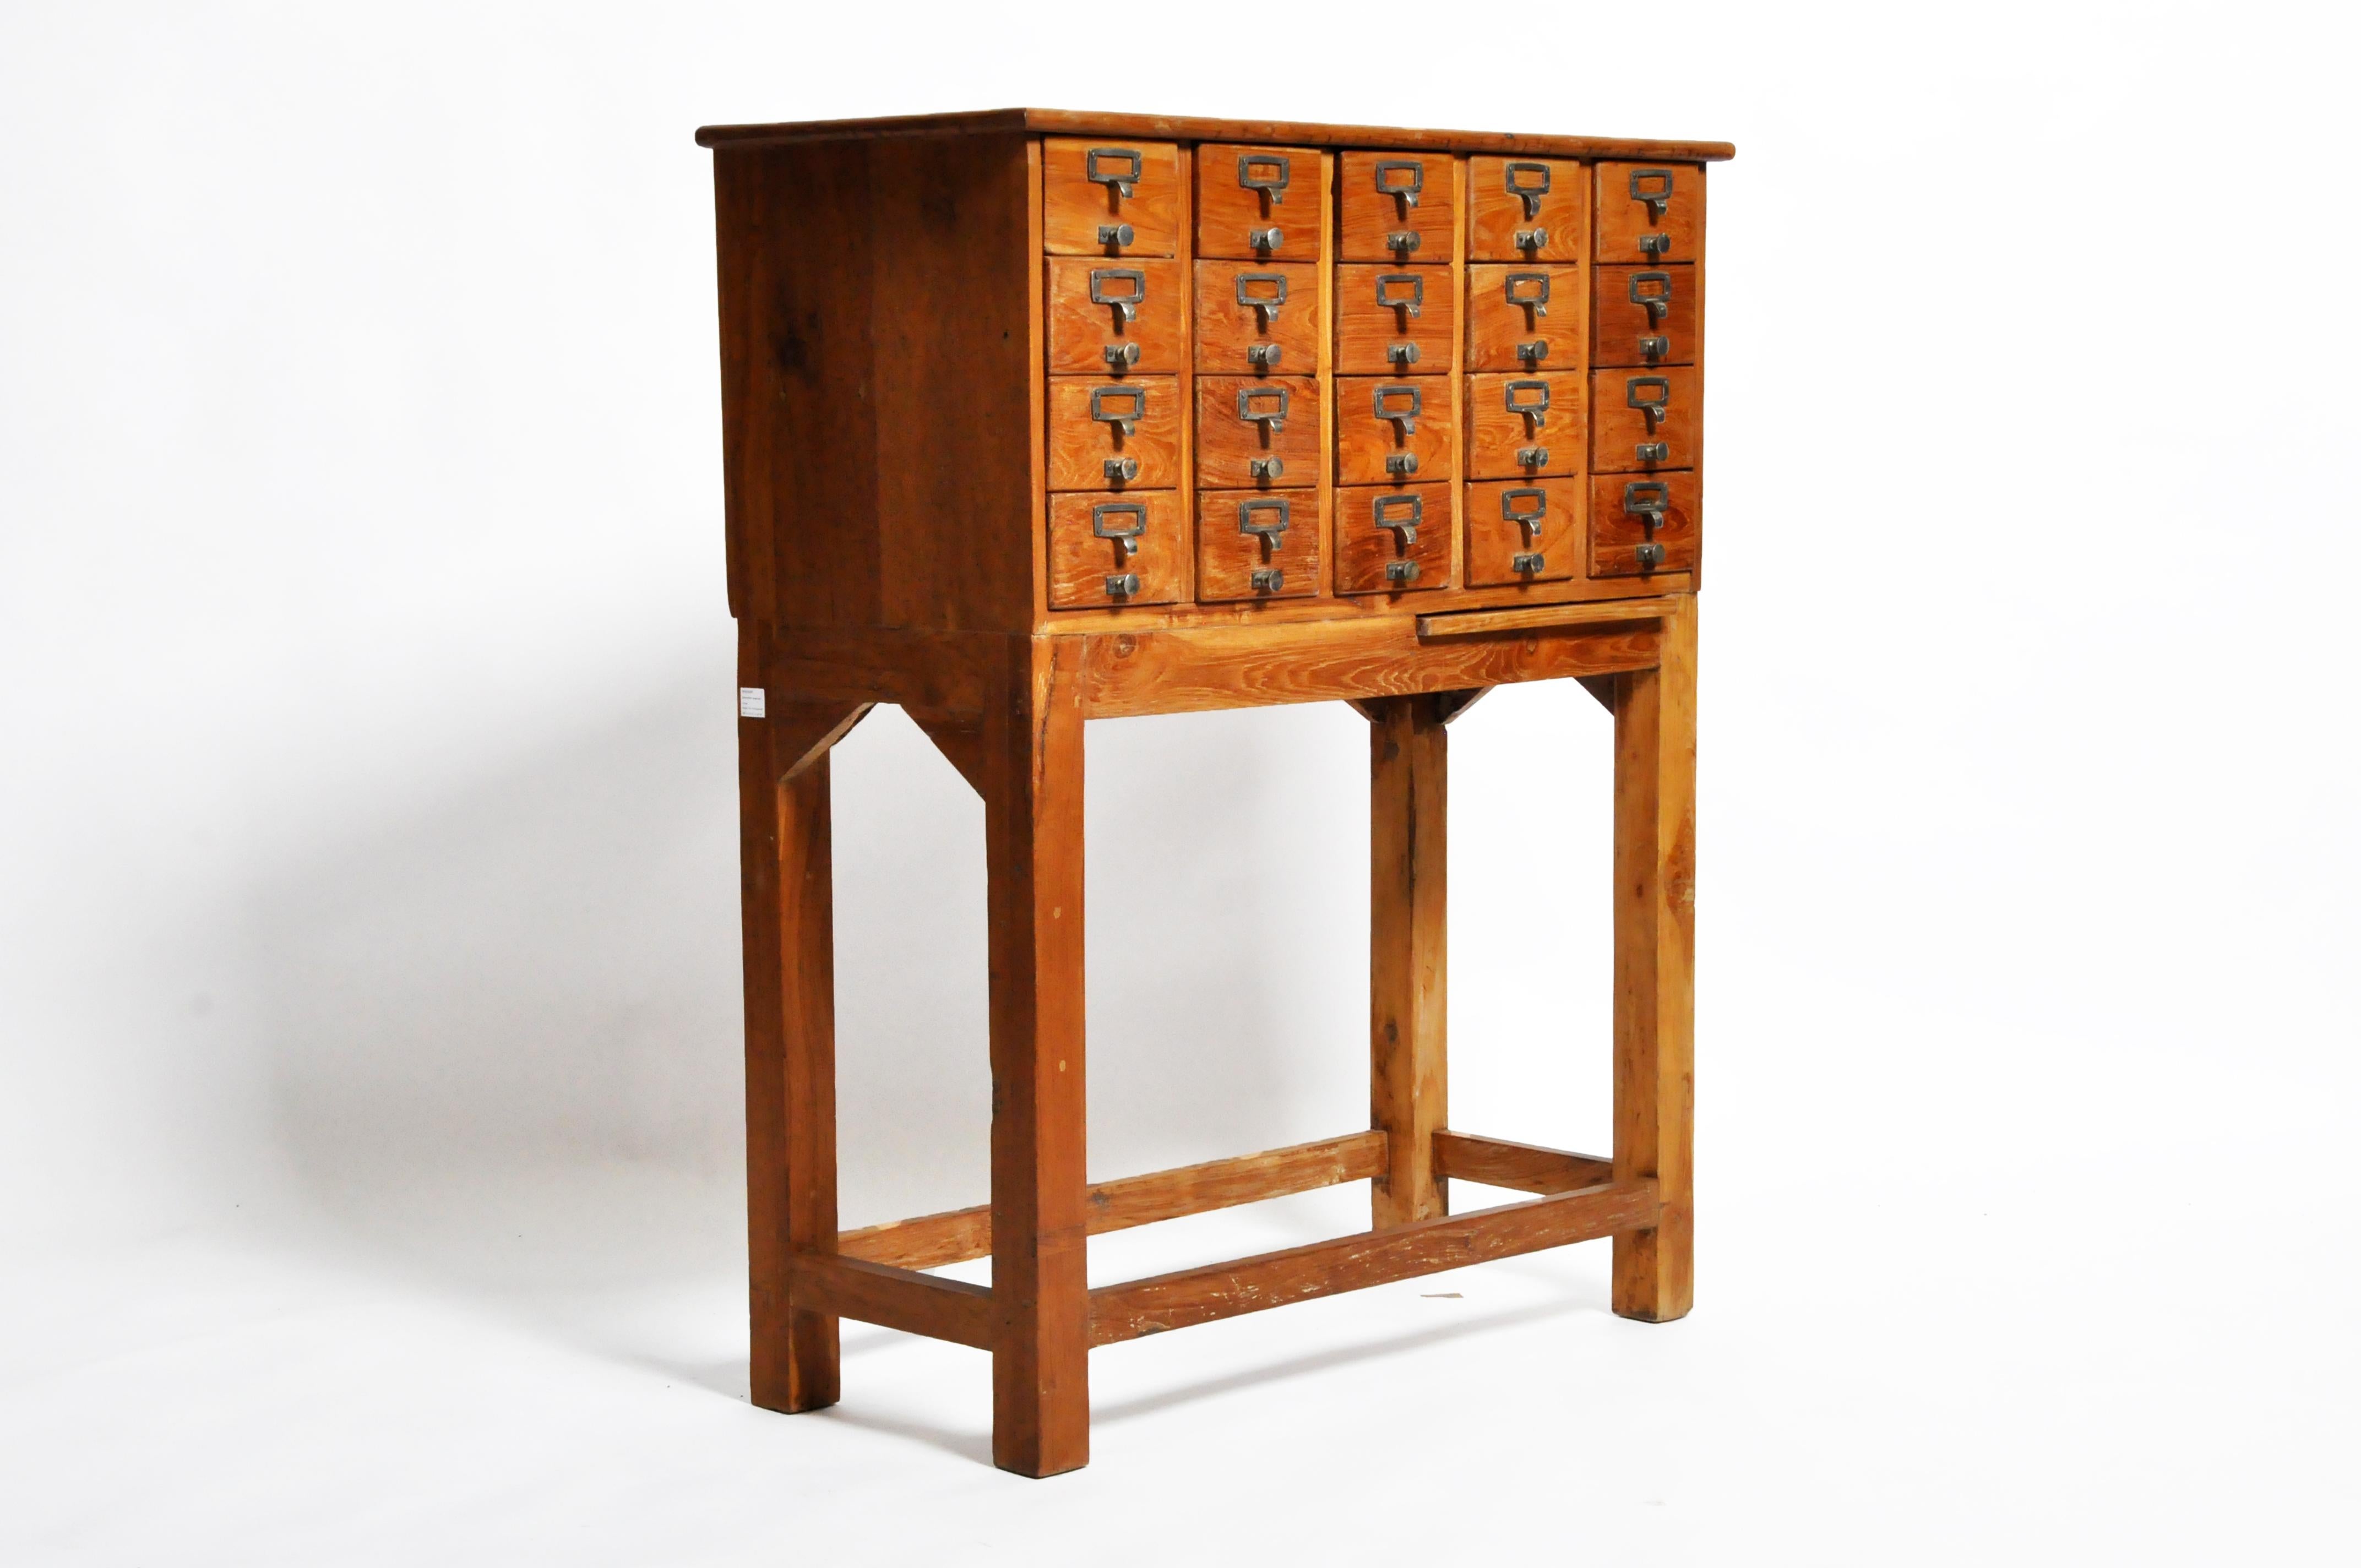 Indian British Colonial Teak Wood Filing Cabinet with 20 Drawers